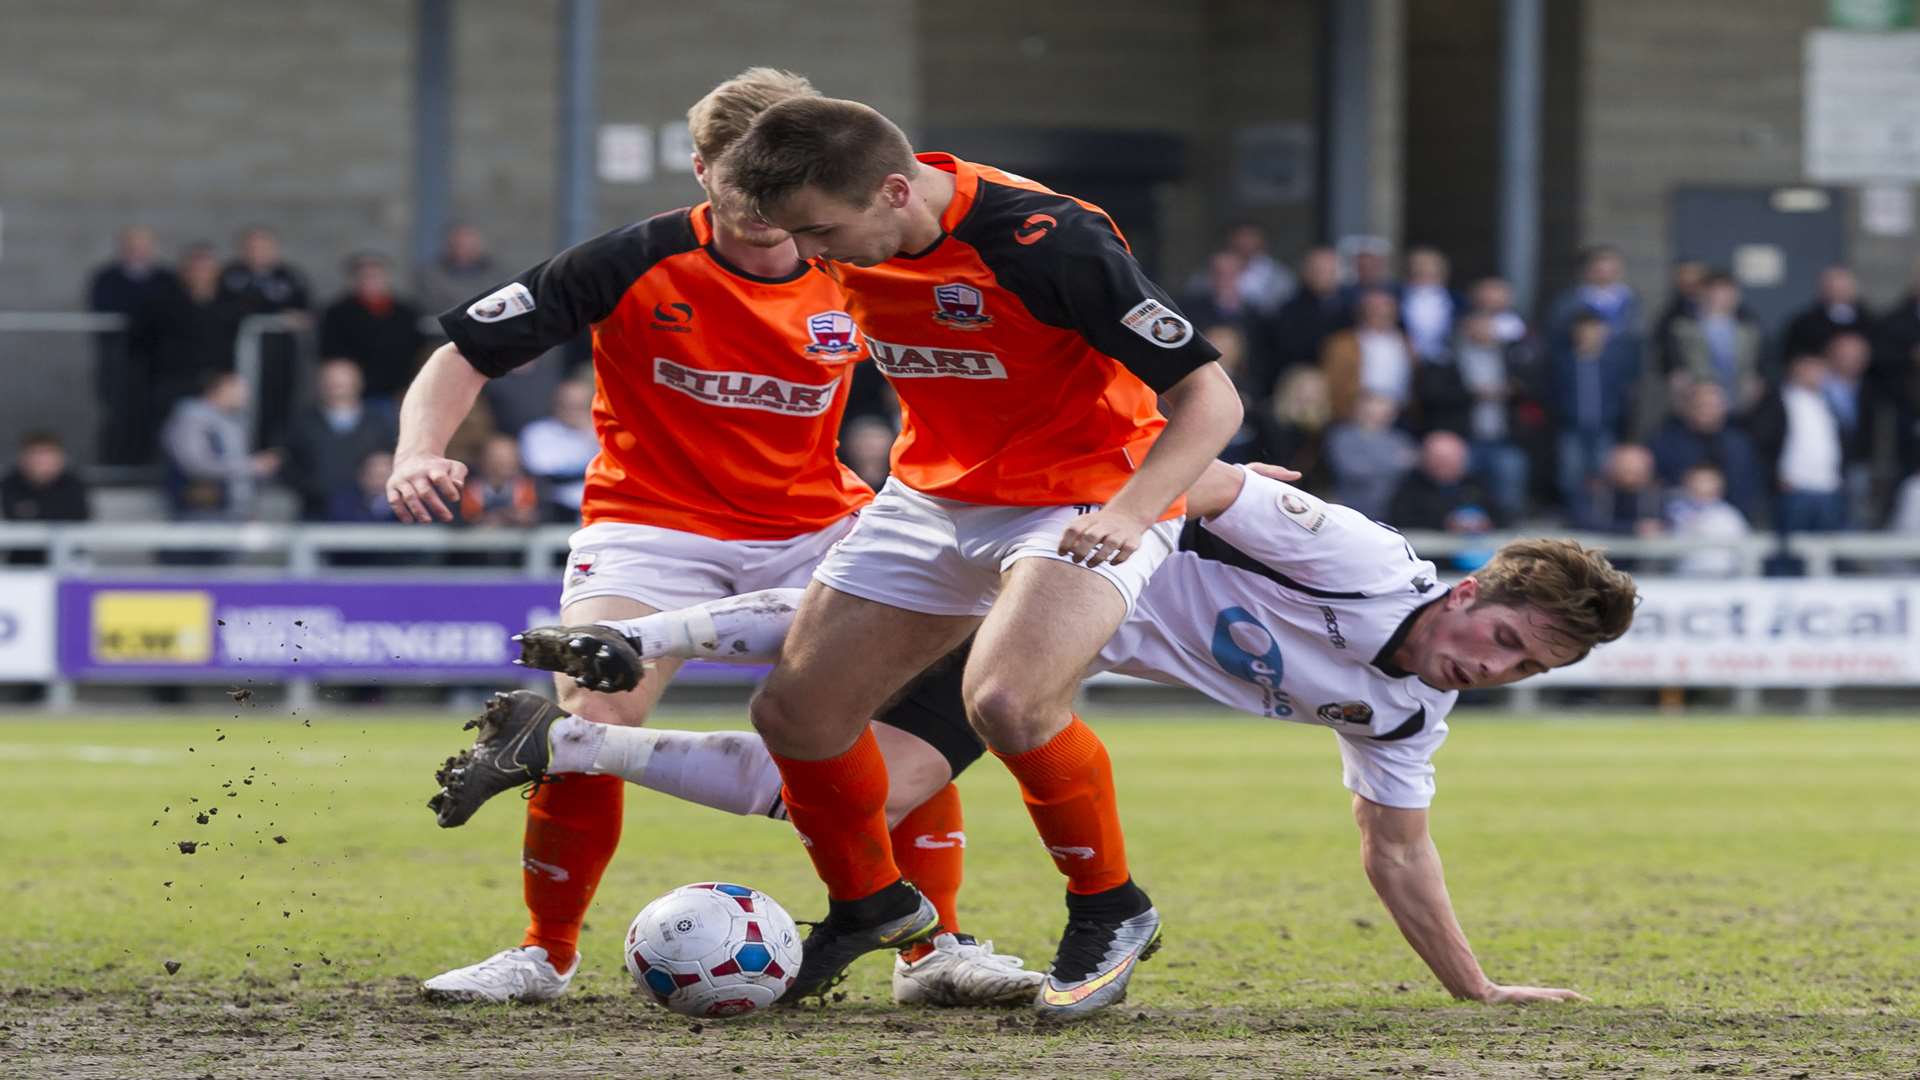 Dartford's Lee Noble takes on two Nuneaton players Picture: Andy Payton